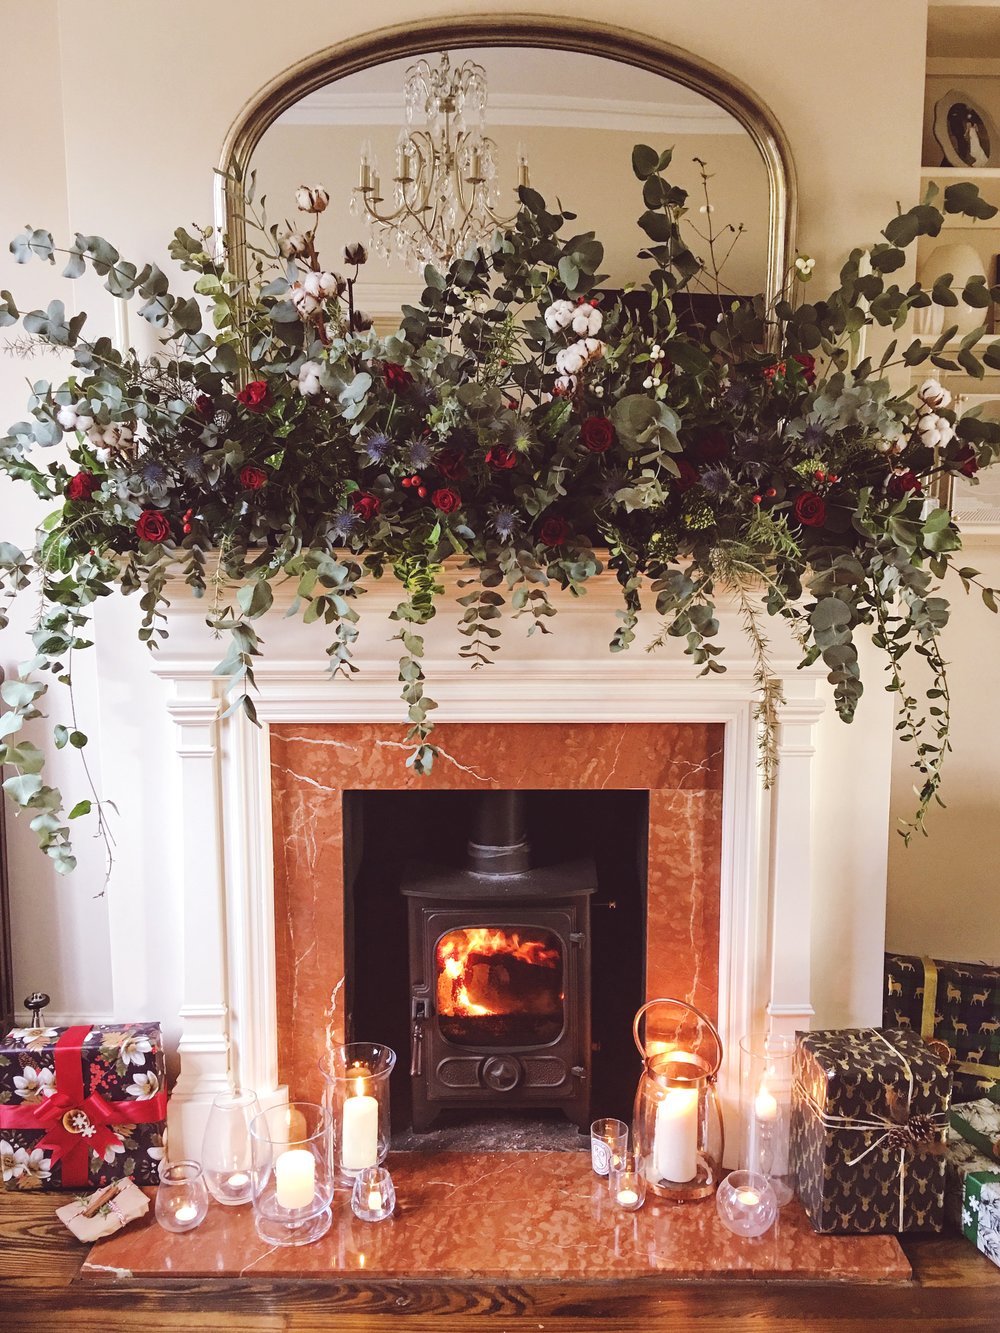 Decorate Non Working Fireplace Luxury My Home at Christmas How to Make This Fireplace Garland